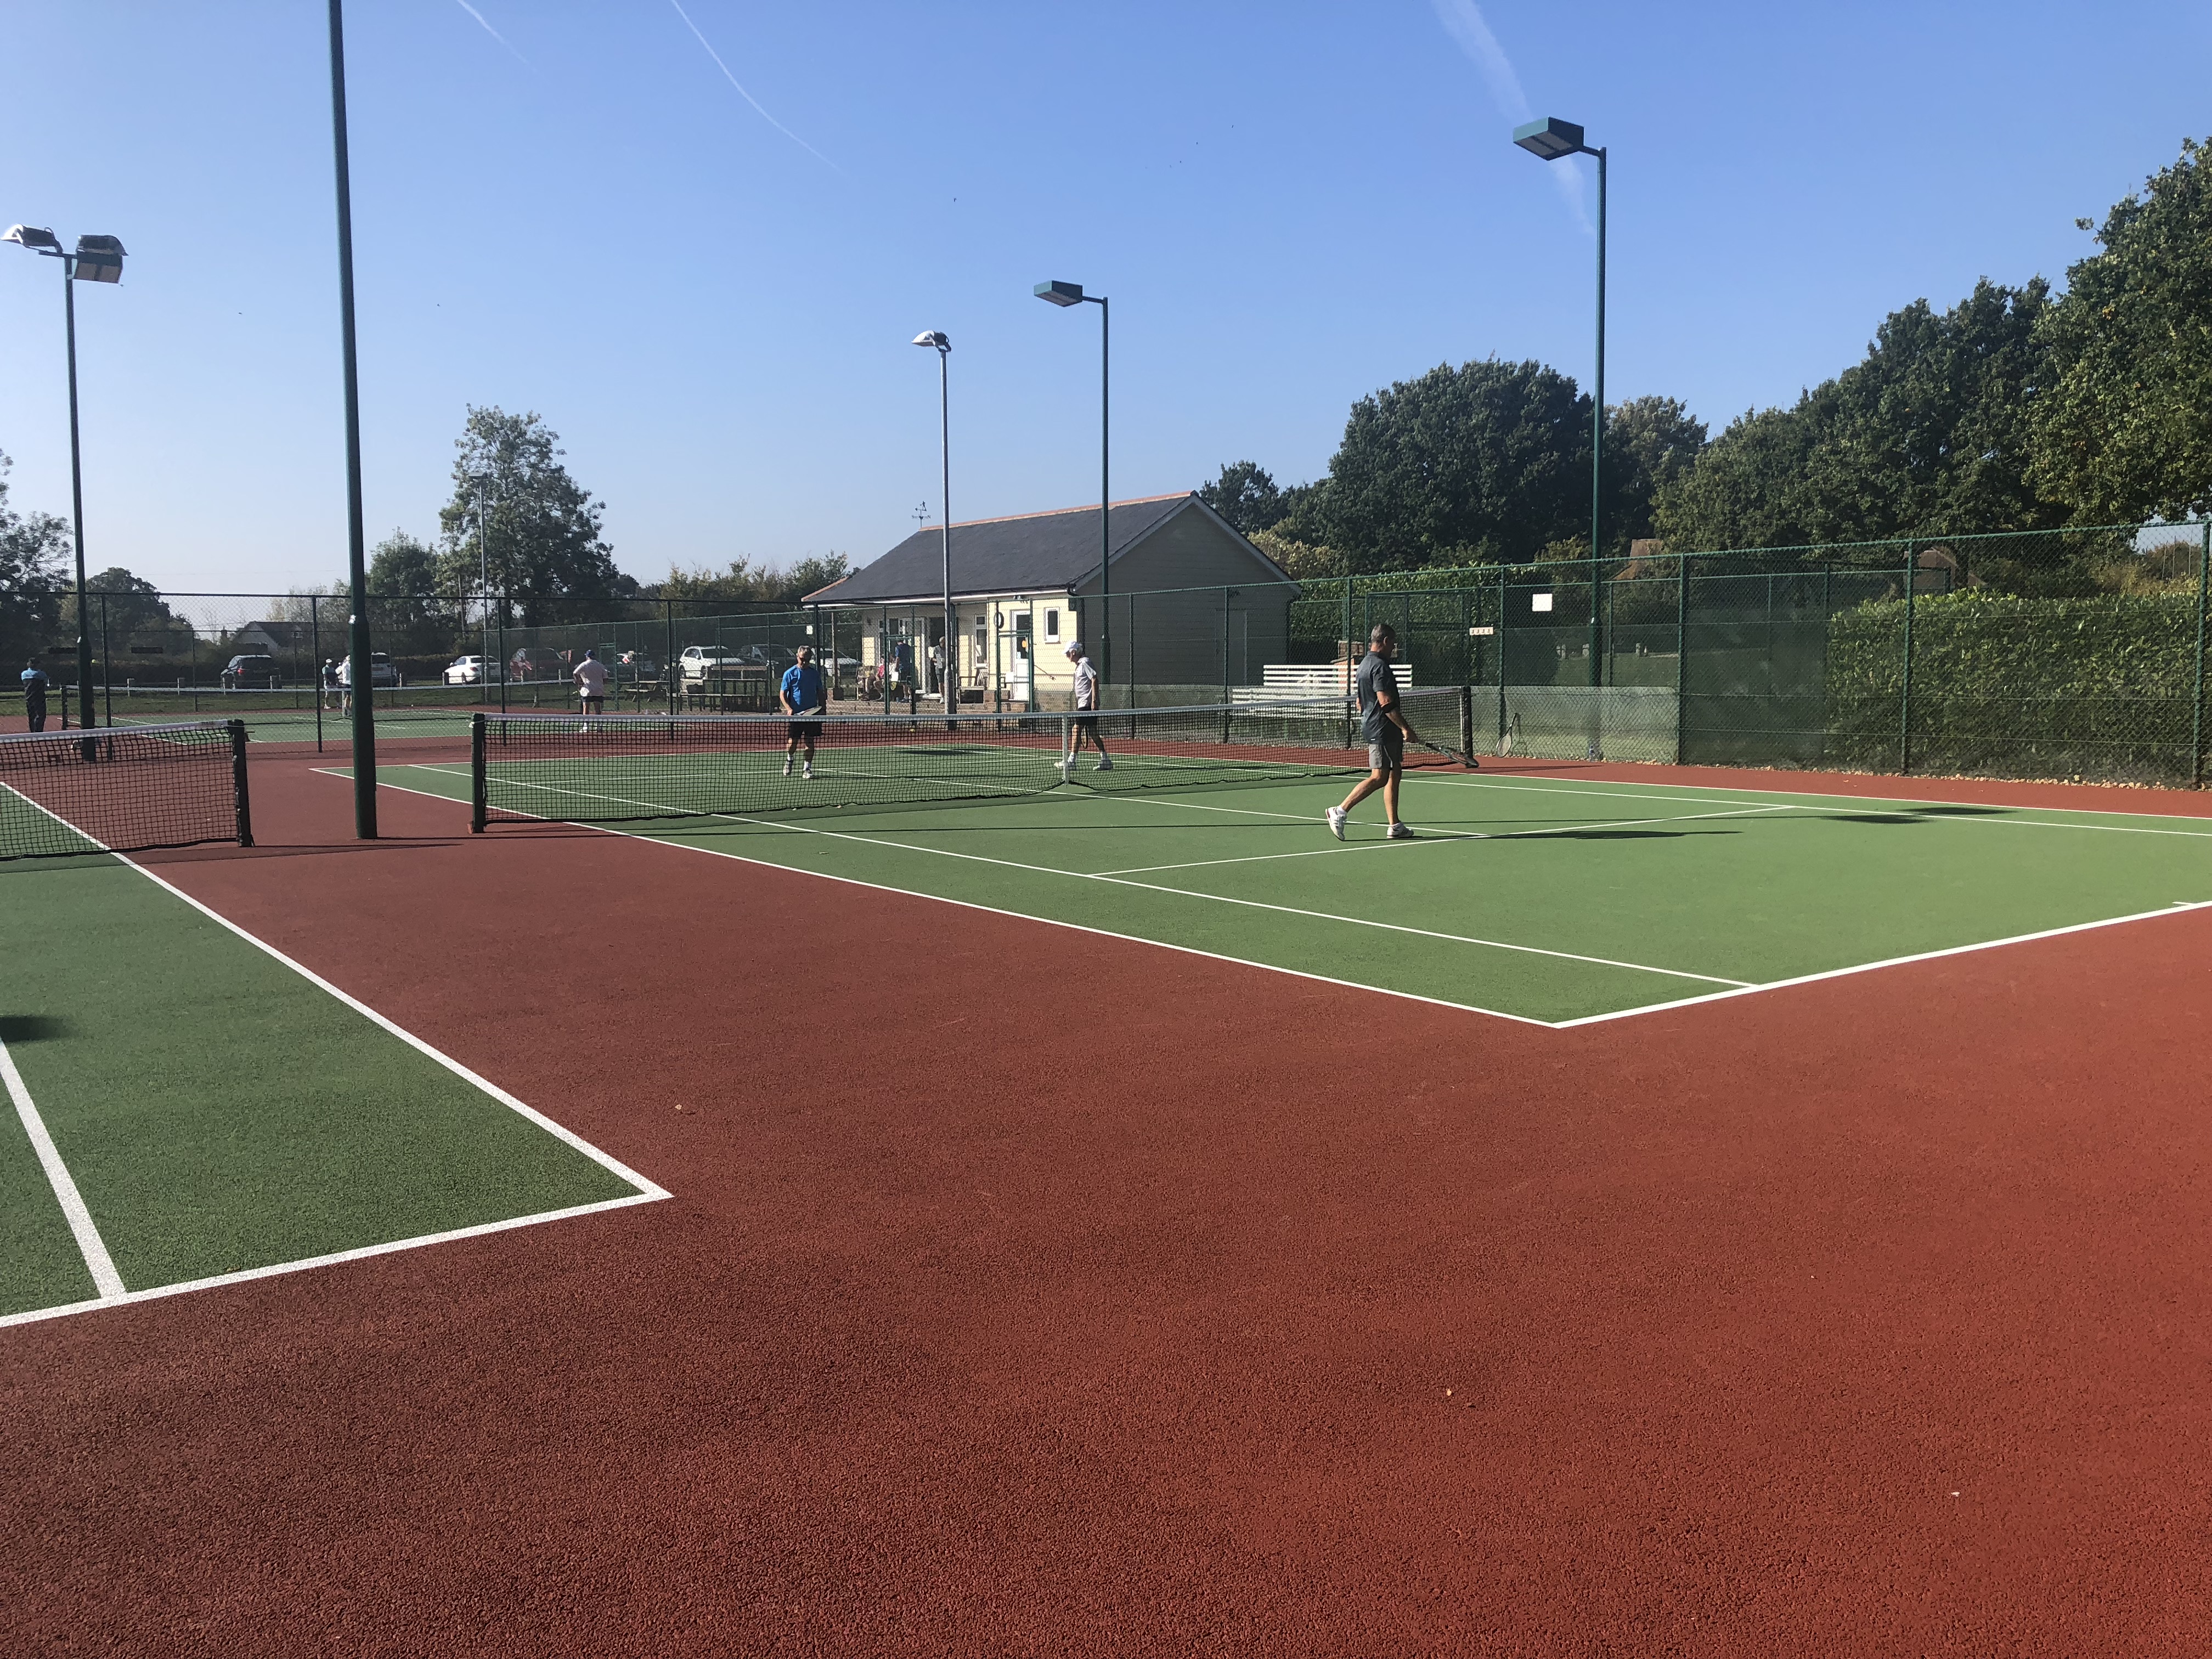 Brand-new tennis court surfaces resurfaced by ETC Sports in July 2018